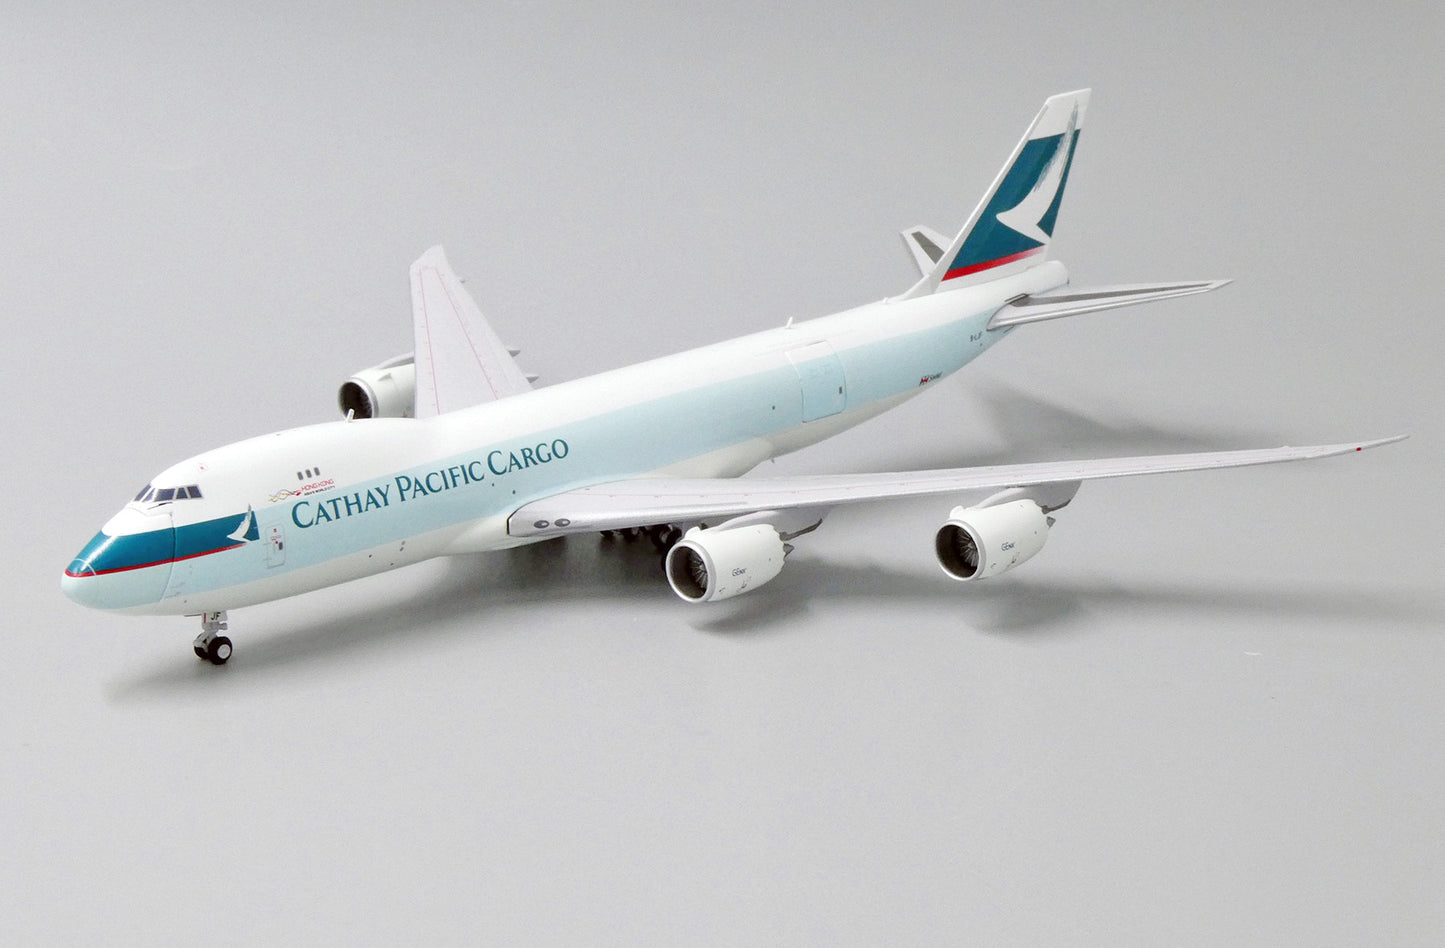 1:400 JC Wings Cathay Pacific Cargo 747-8F B-LJF "Interactive" EW4748010